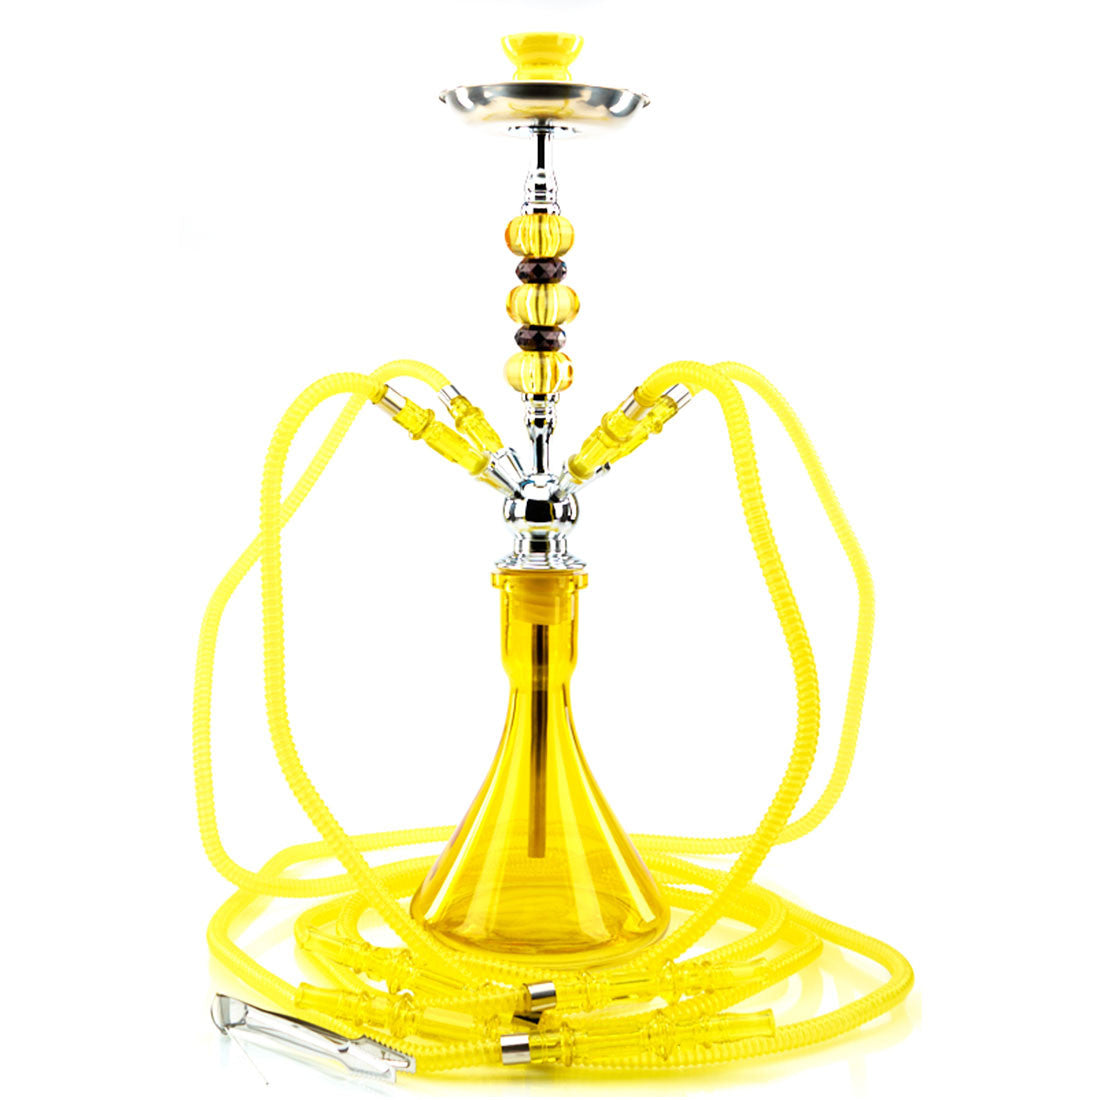 Vadra Ness Multi-Hose Hookah for up to 4 people with matching ceramic bowl bright yellow with black accents